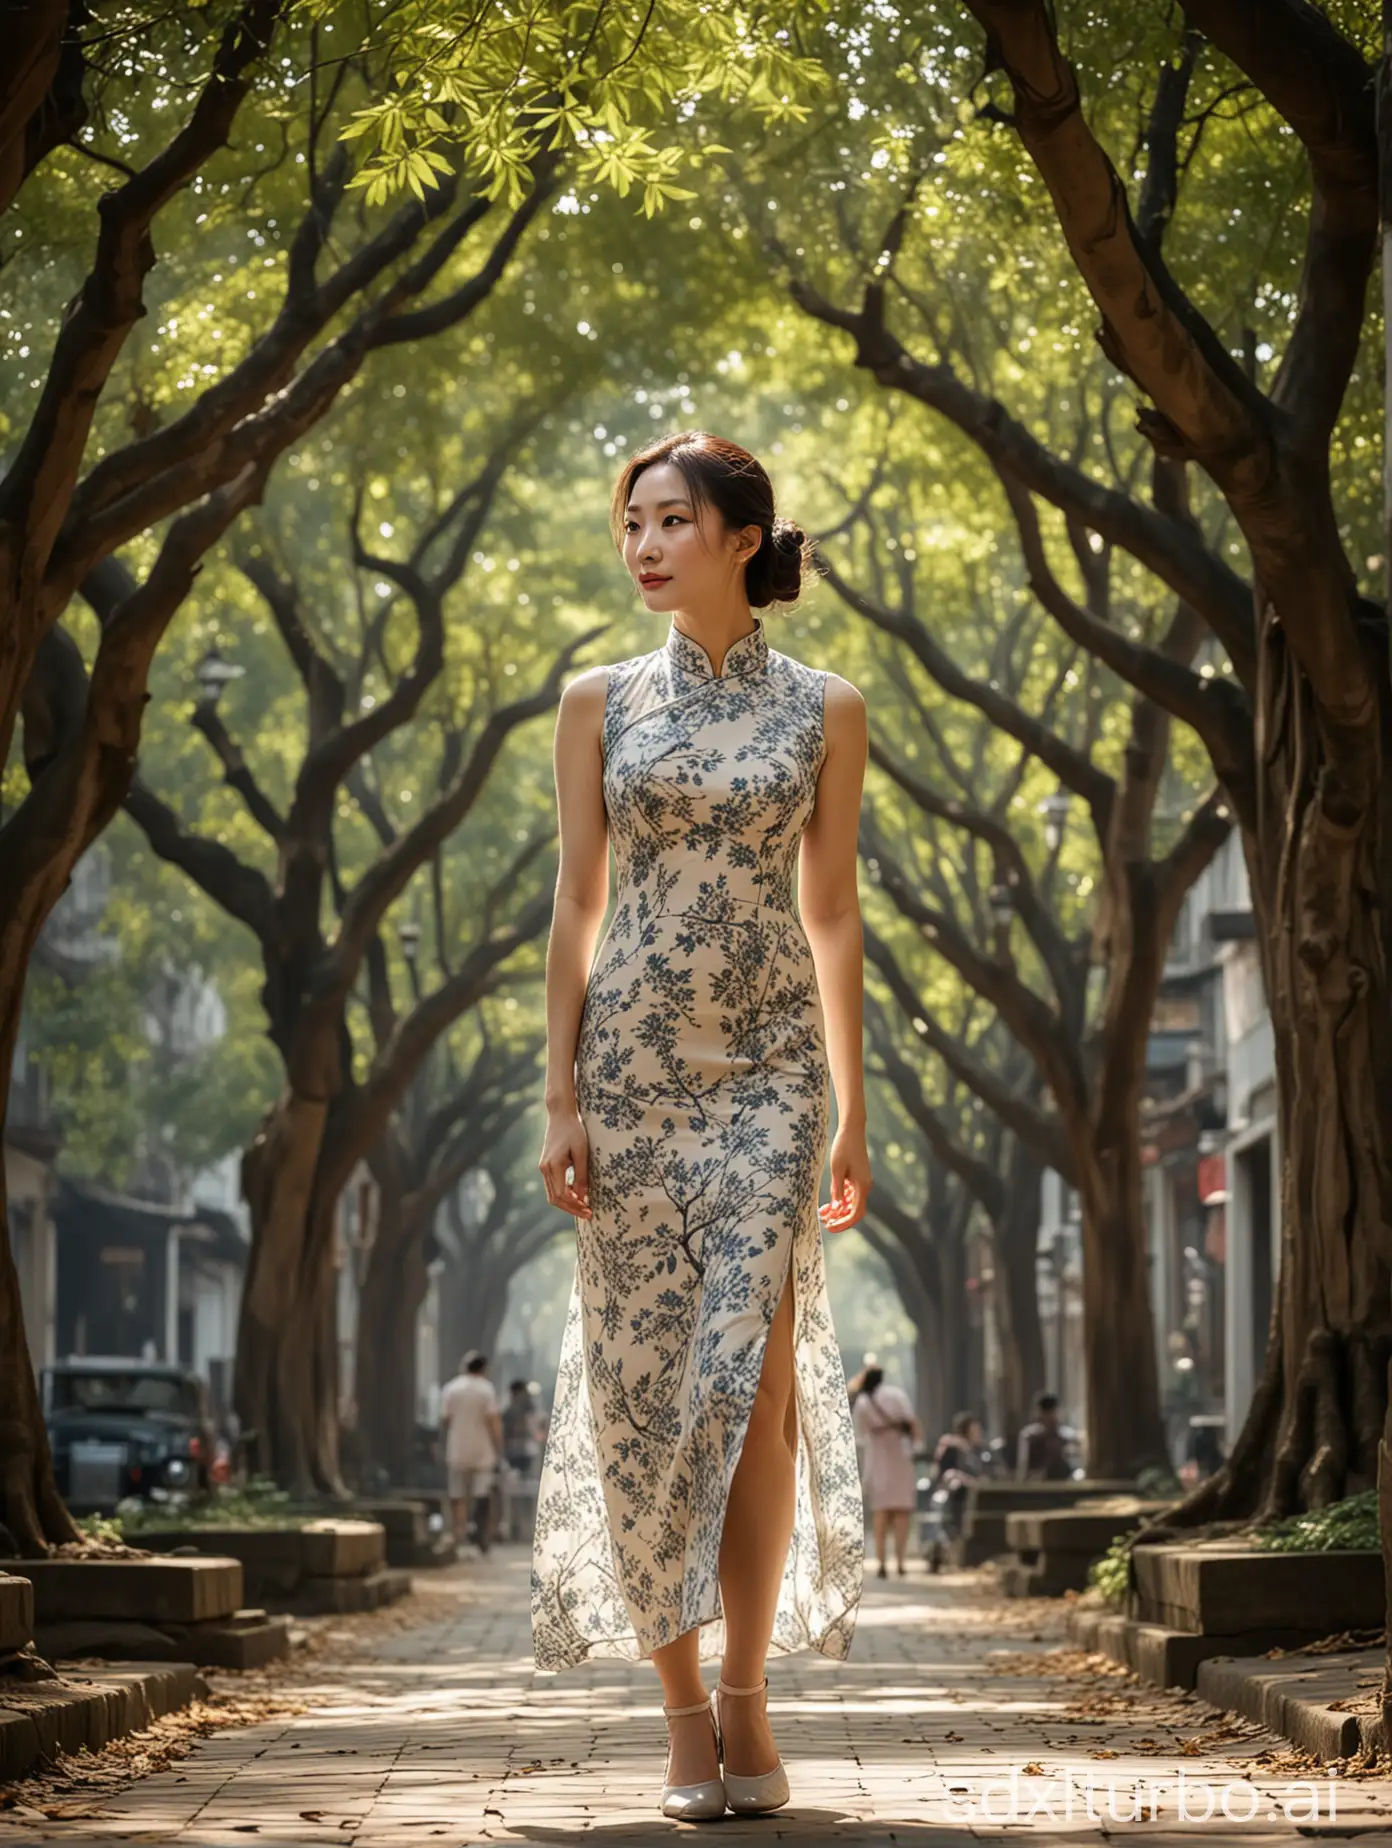 The beautiful woman in cheongsam under the plane trees of old Shanghai, the mottled tree shadows intertwined with soft sidelights, creating a dreamy and swaying light and shadow.